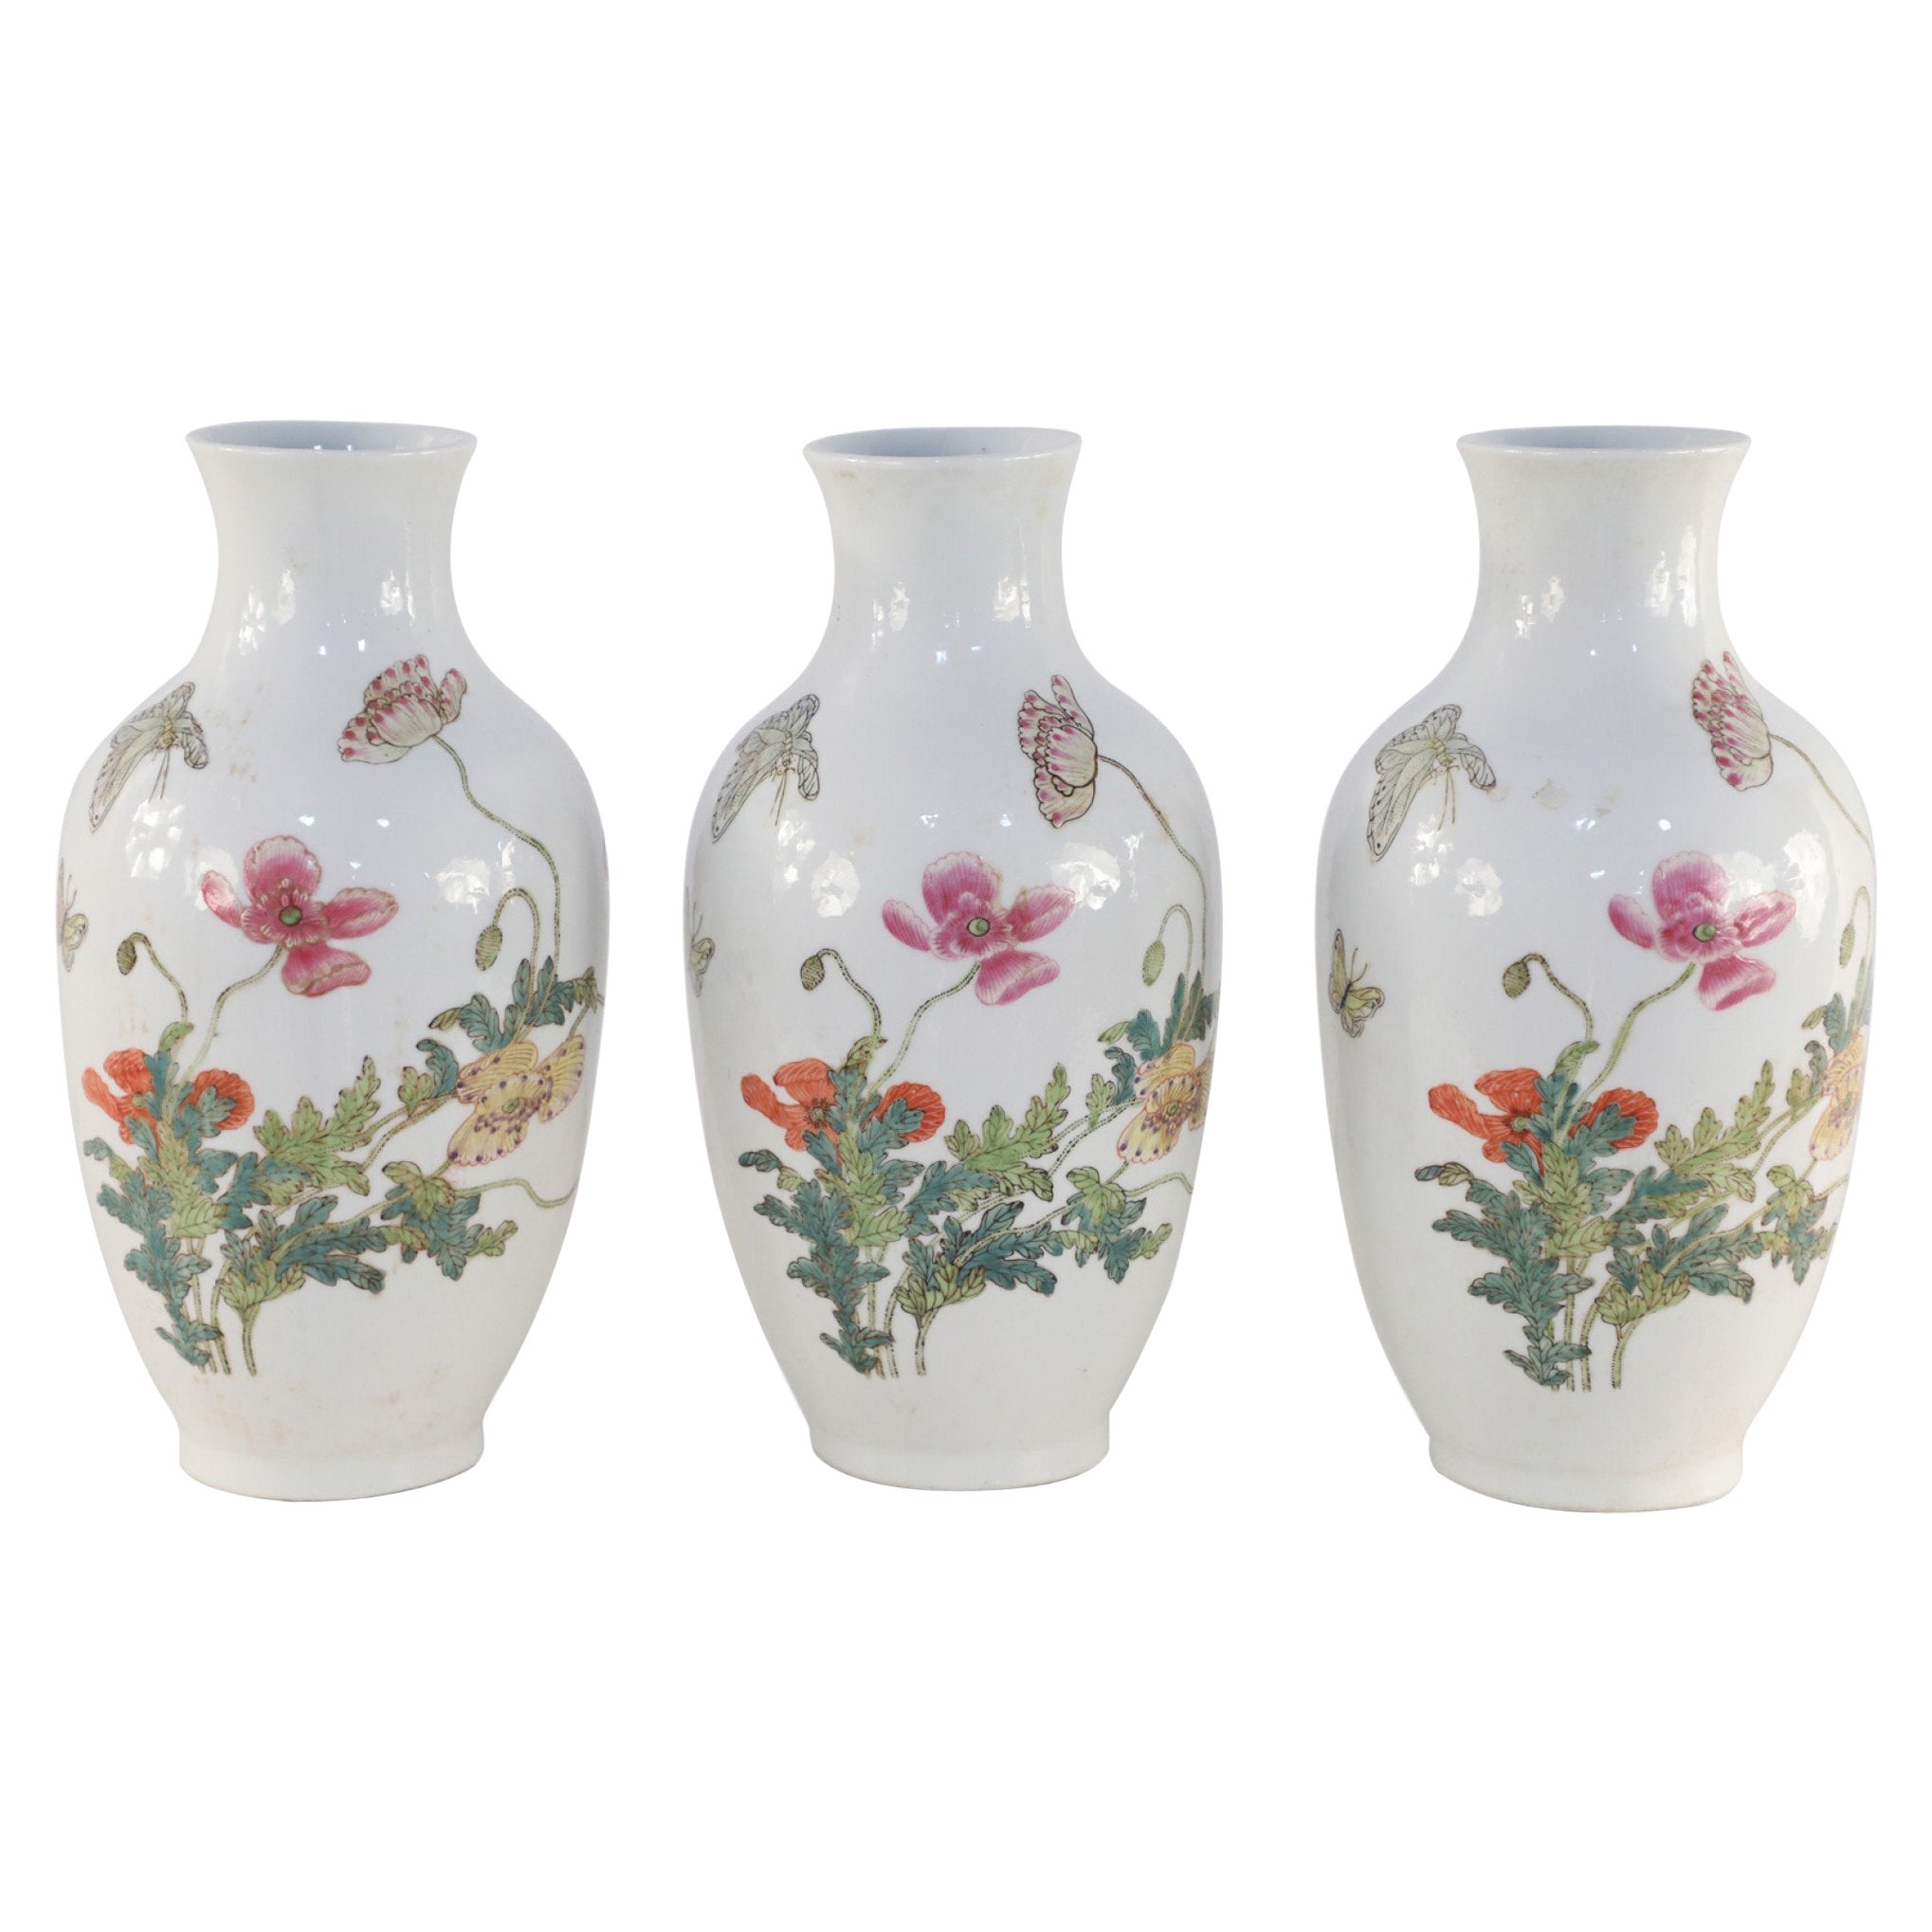 Chinese White Floral and Butterfly Patterned Porcelain Vases